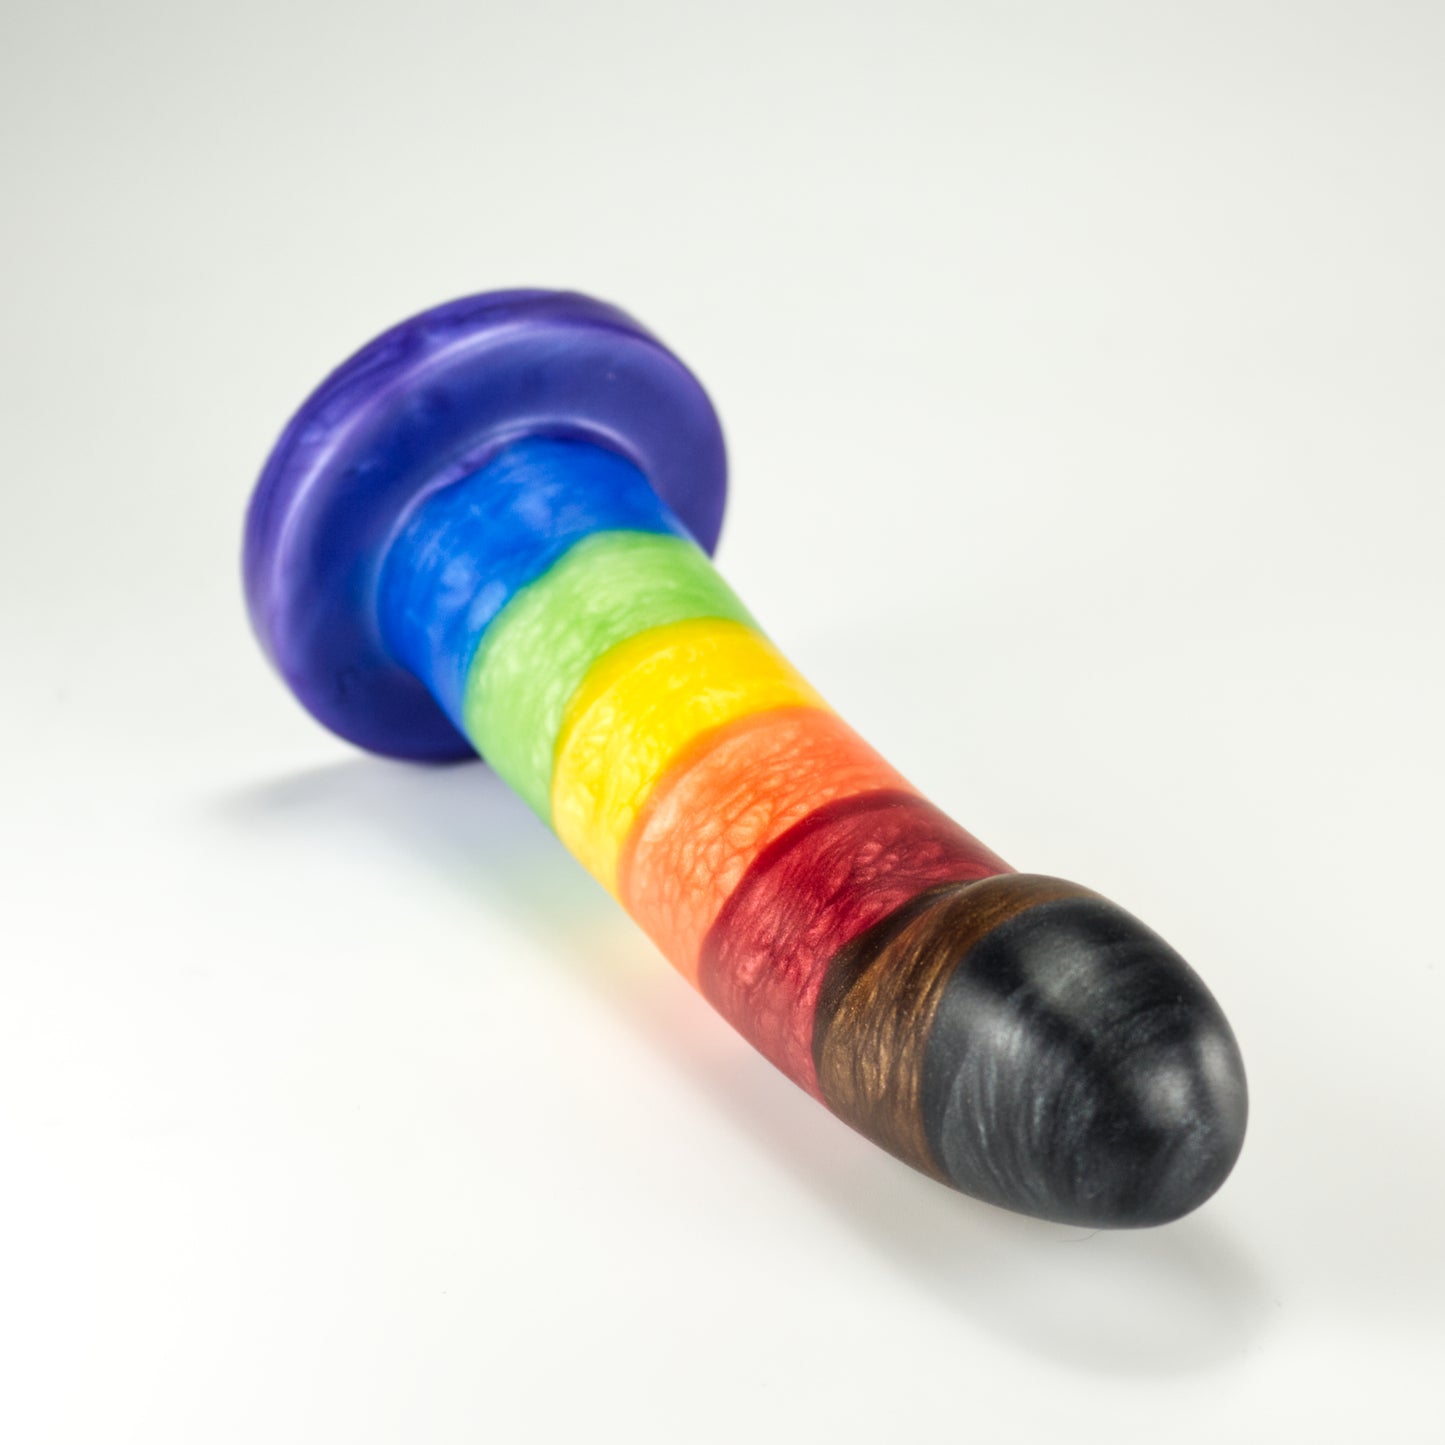 Top view of the Sidekick Small, a dildo with a smooth cylinder shaped body, and a fingertip-shaped tip, and a pronounced cliff shape where they meet. Color is rainbow striped with additional black and brown stripes at tip.